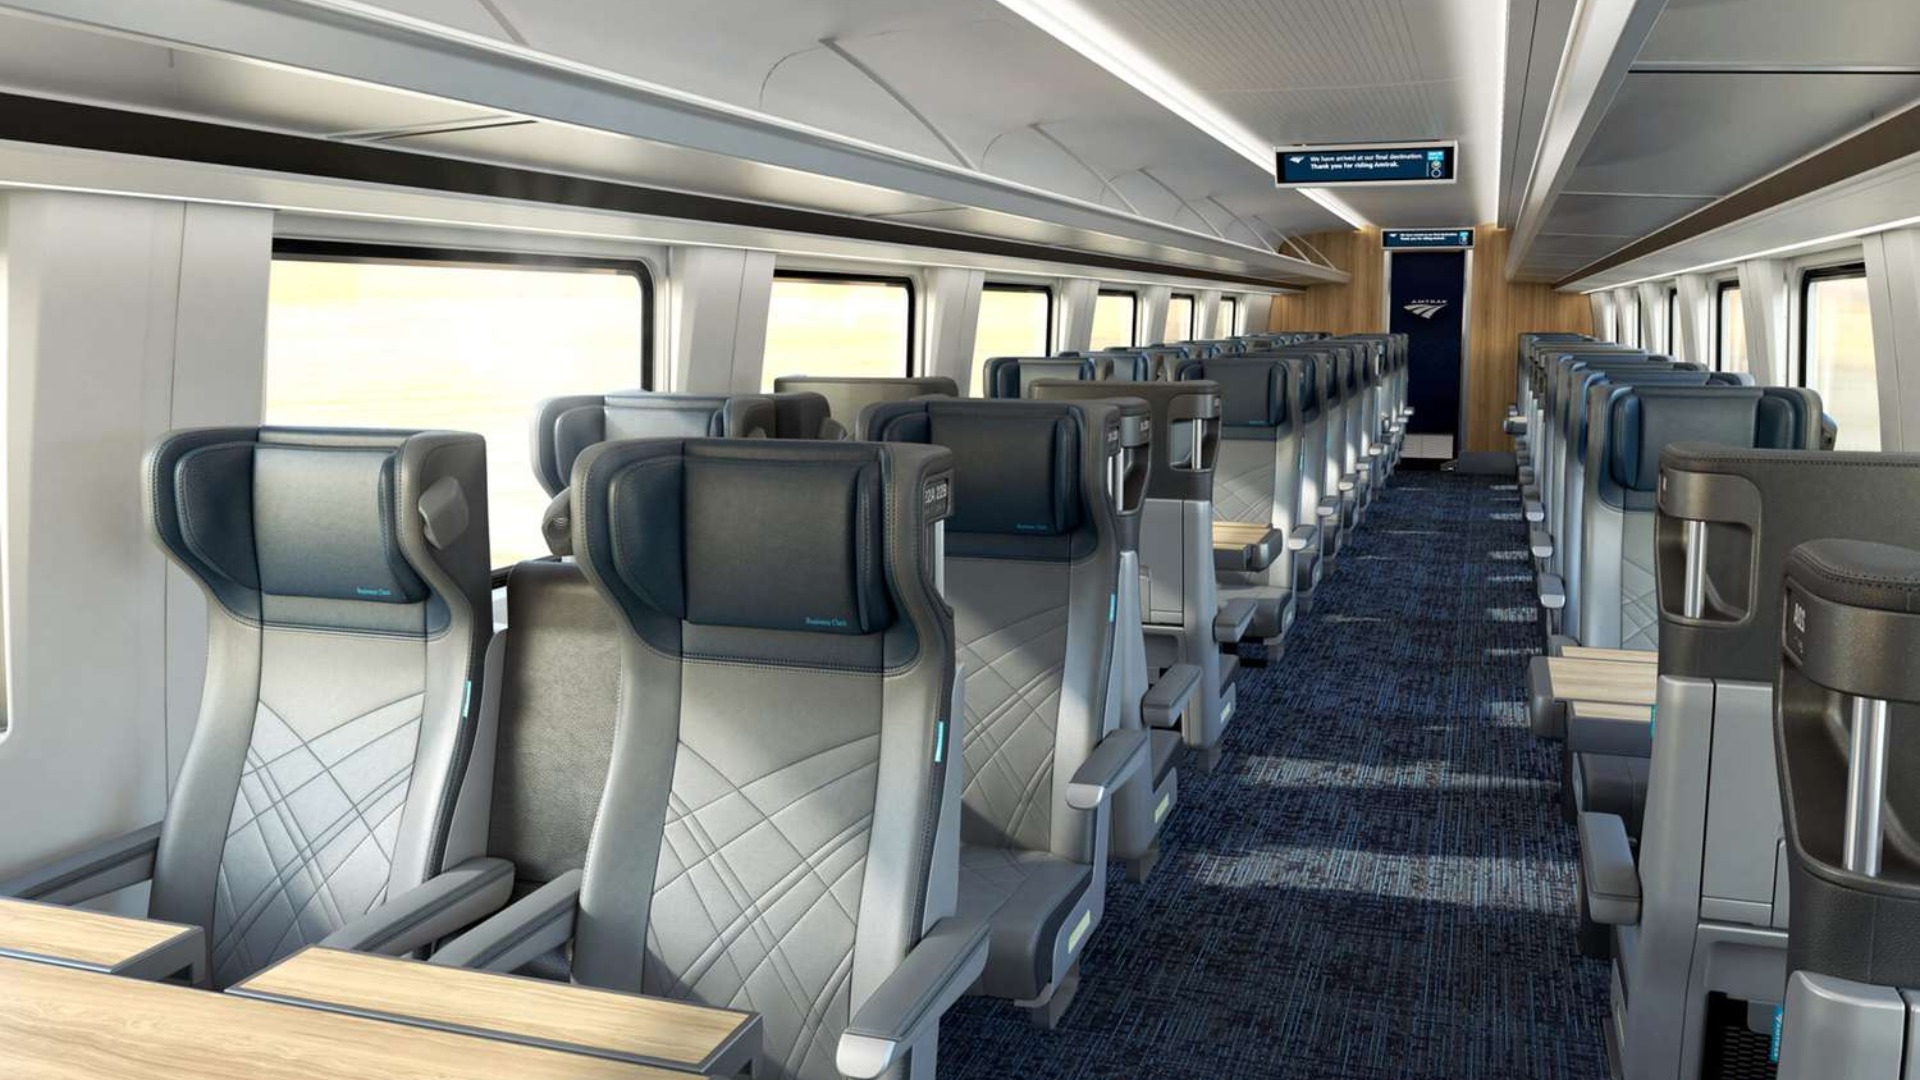 On Certain Destinations, Amtrak Is Now Offering Tickets For Just $5